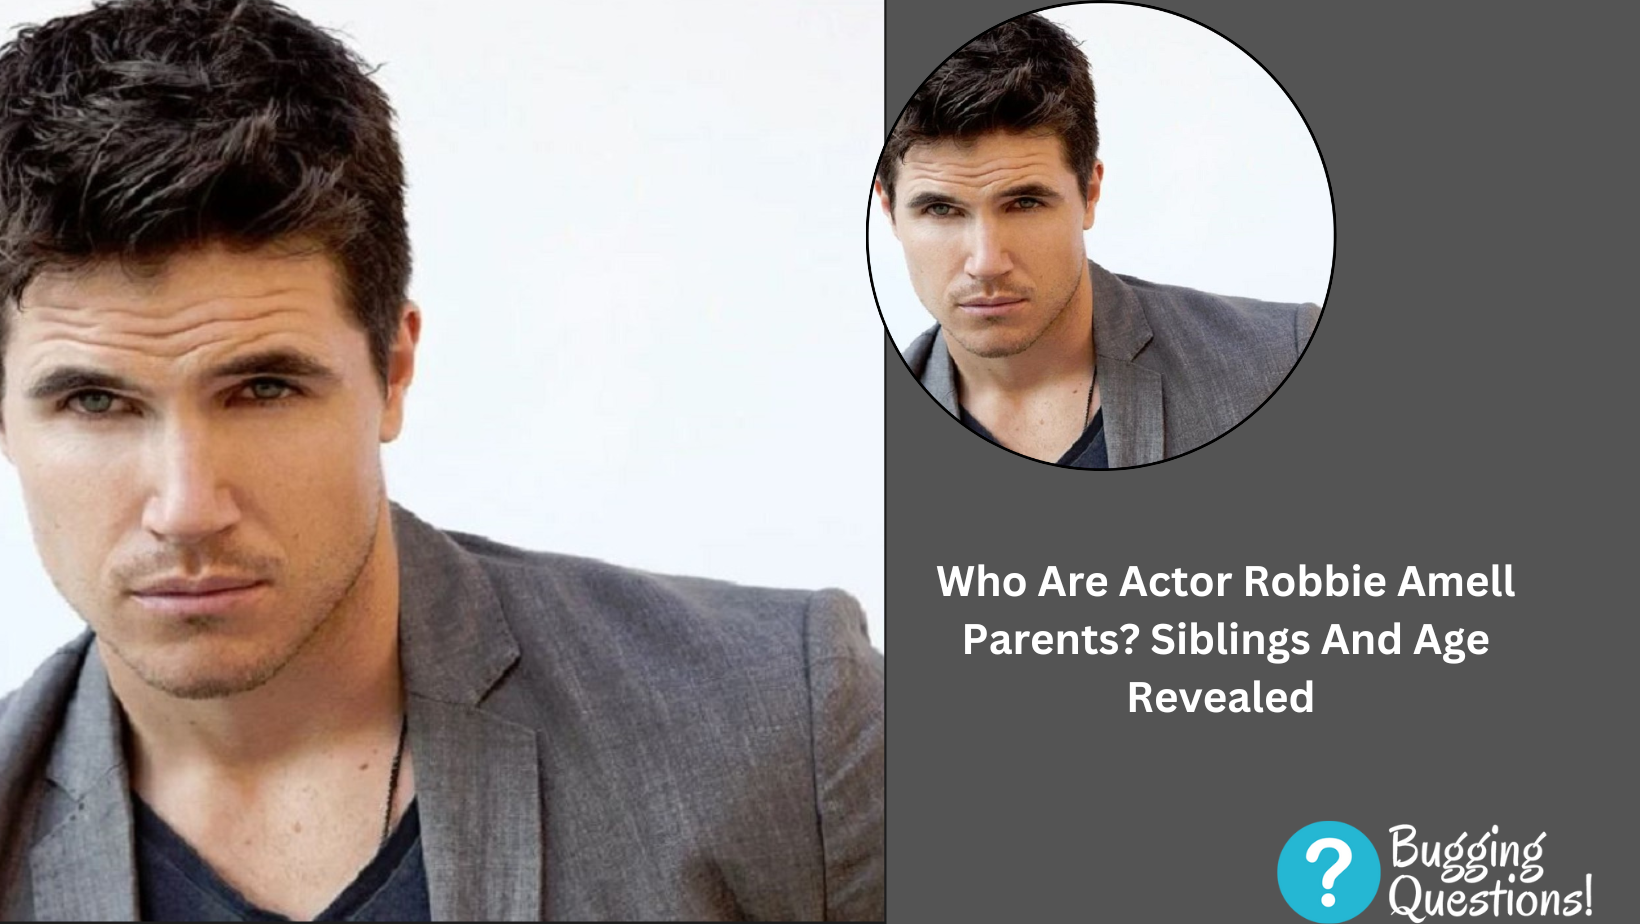 Who Are Actor Robbie Amell Parents?